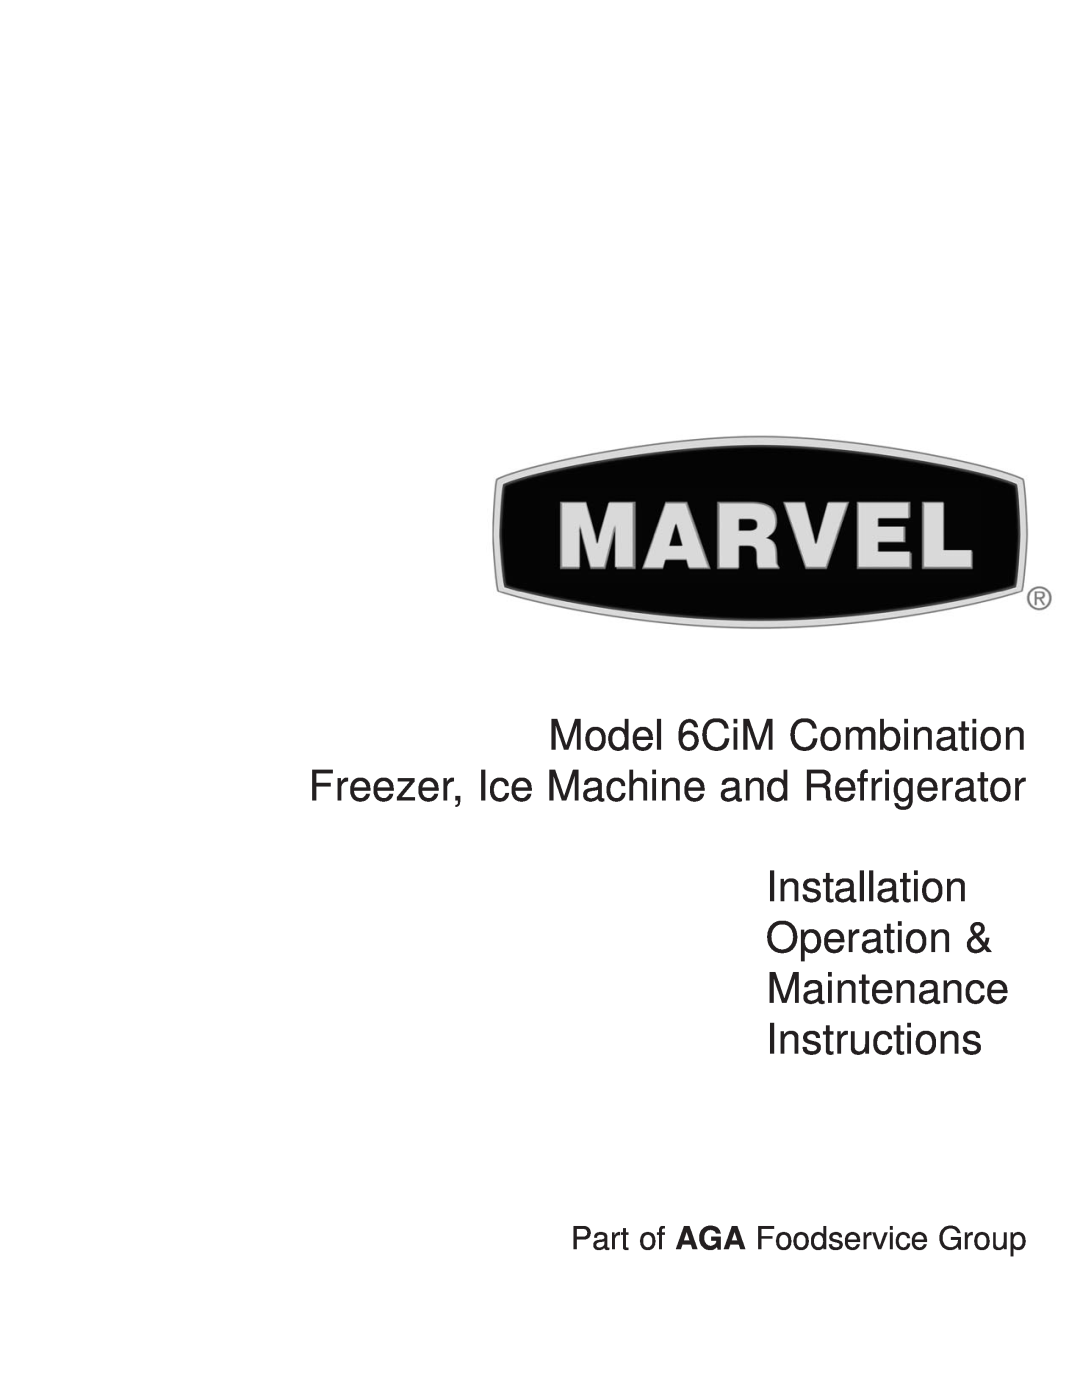 Marvel Industries 6CiM manual Part of AGA Foodservice Group, Installation Operation & Maintenance Instructions 